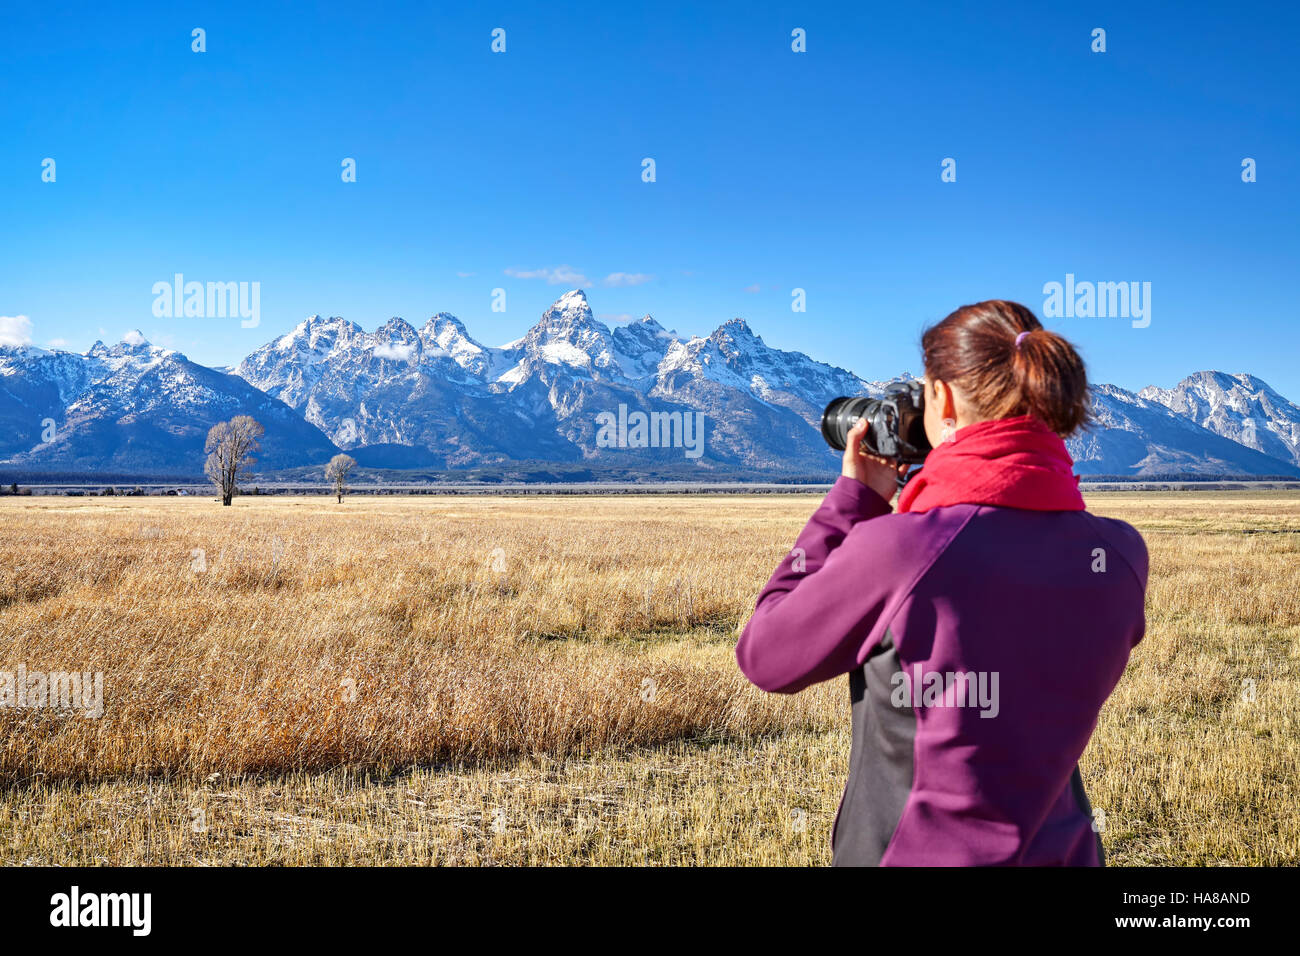 Dslr Camera Background High Resolution Stock Photography And Images Alamy